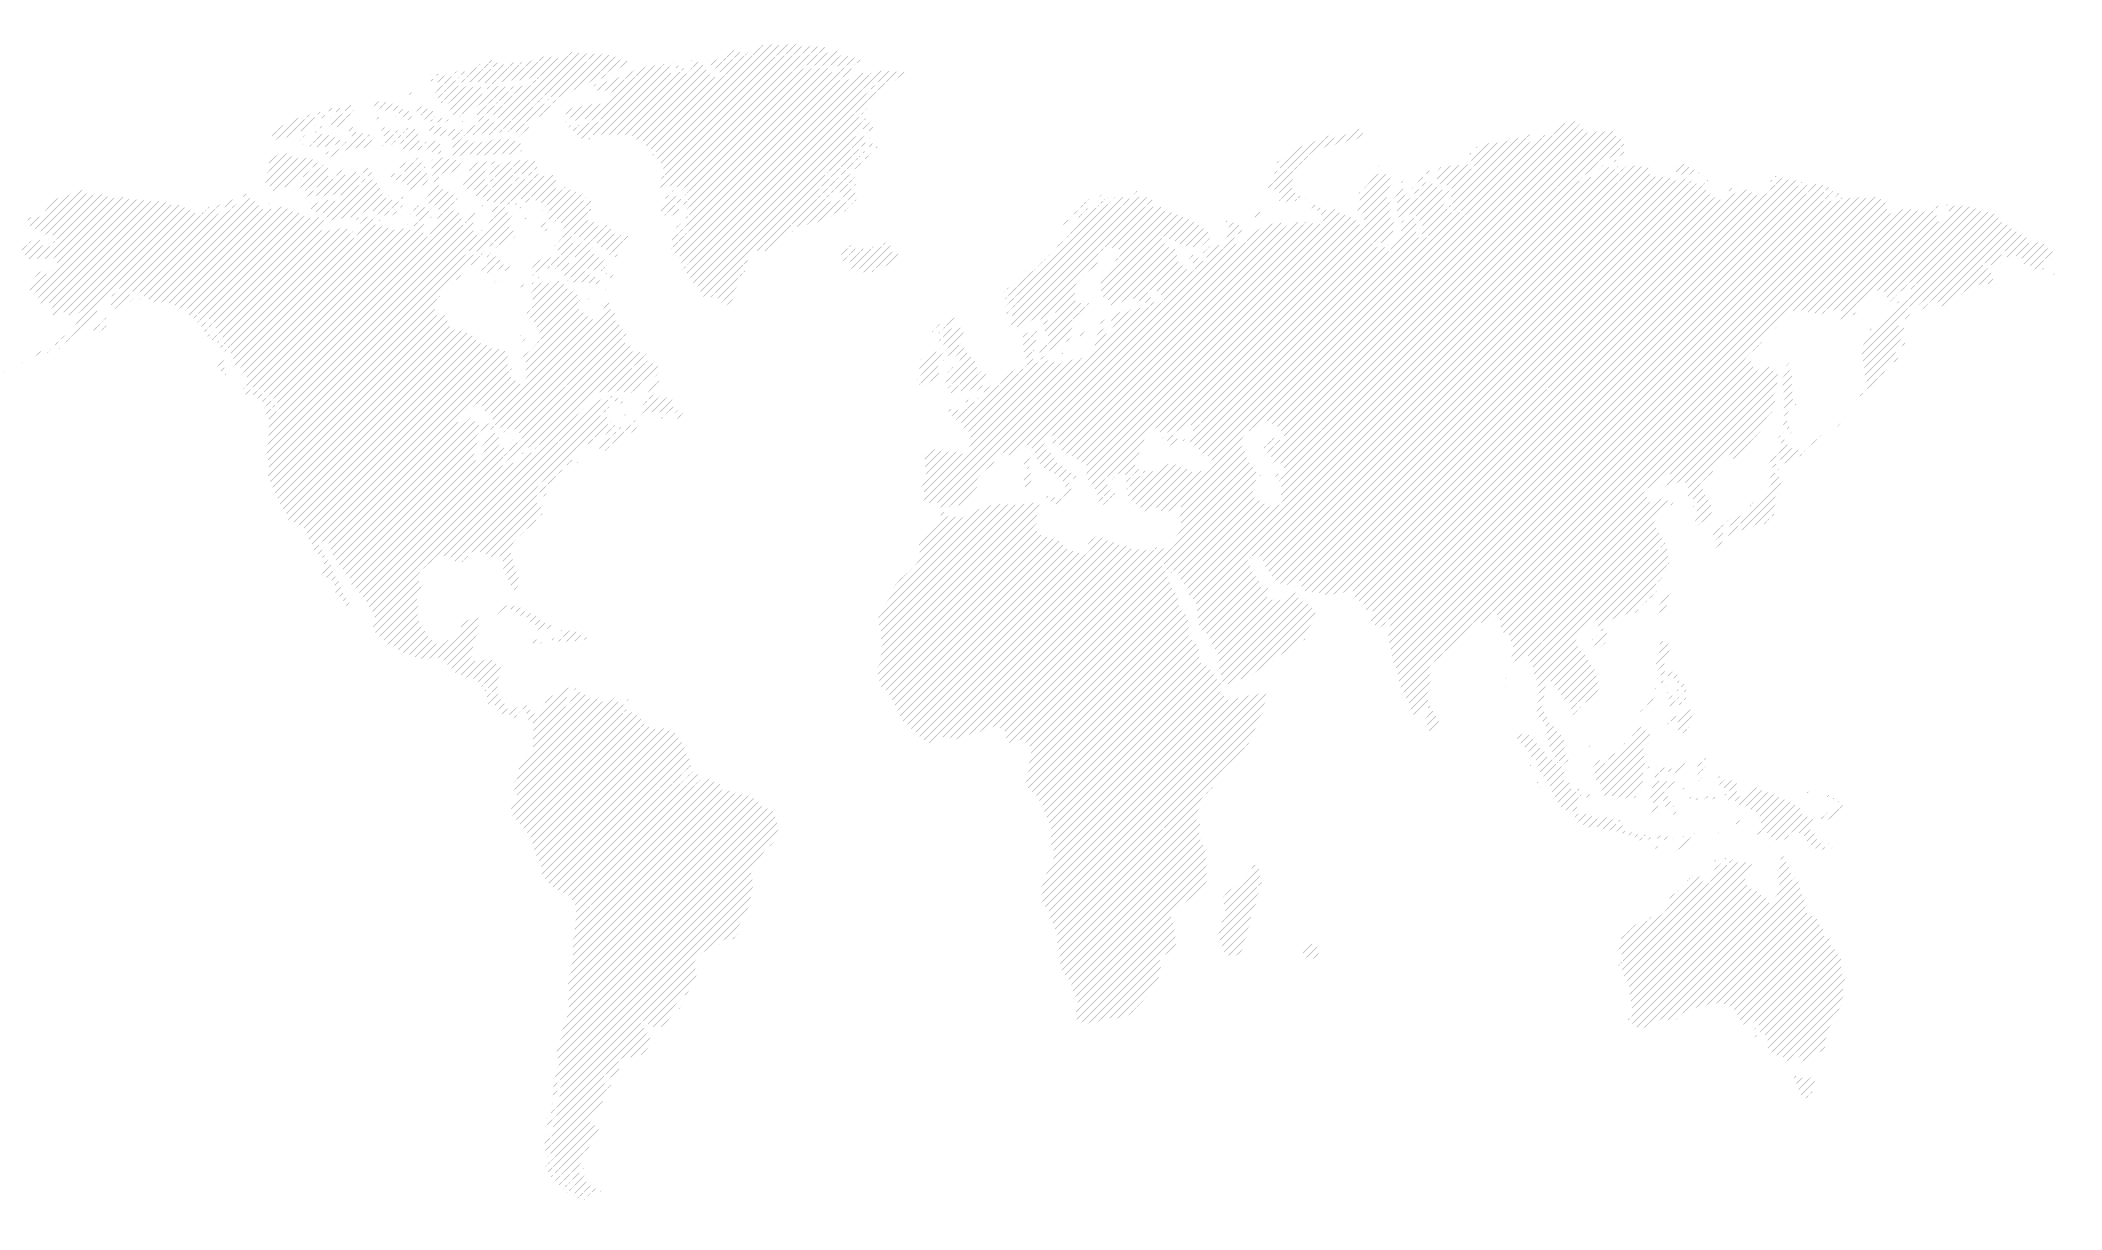 GMBA Countries Represented Map